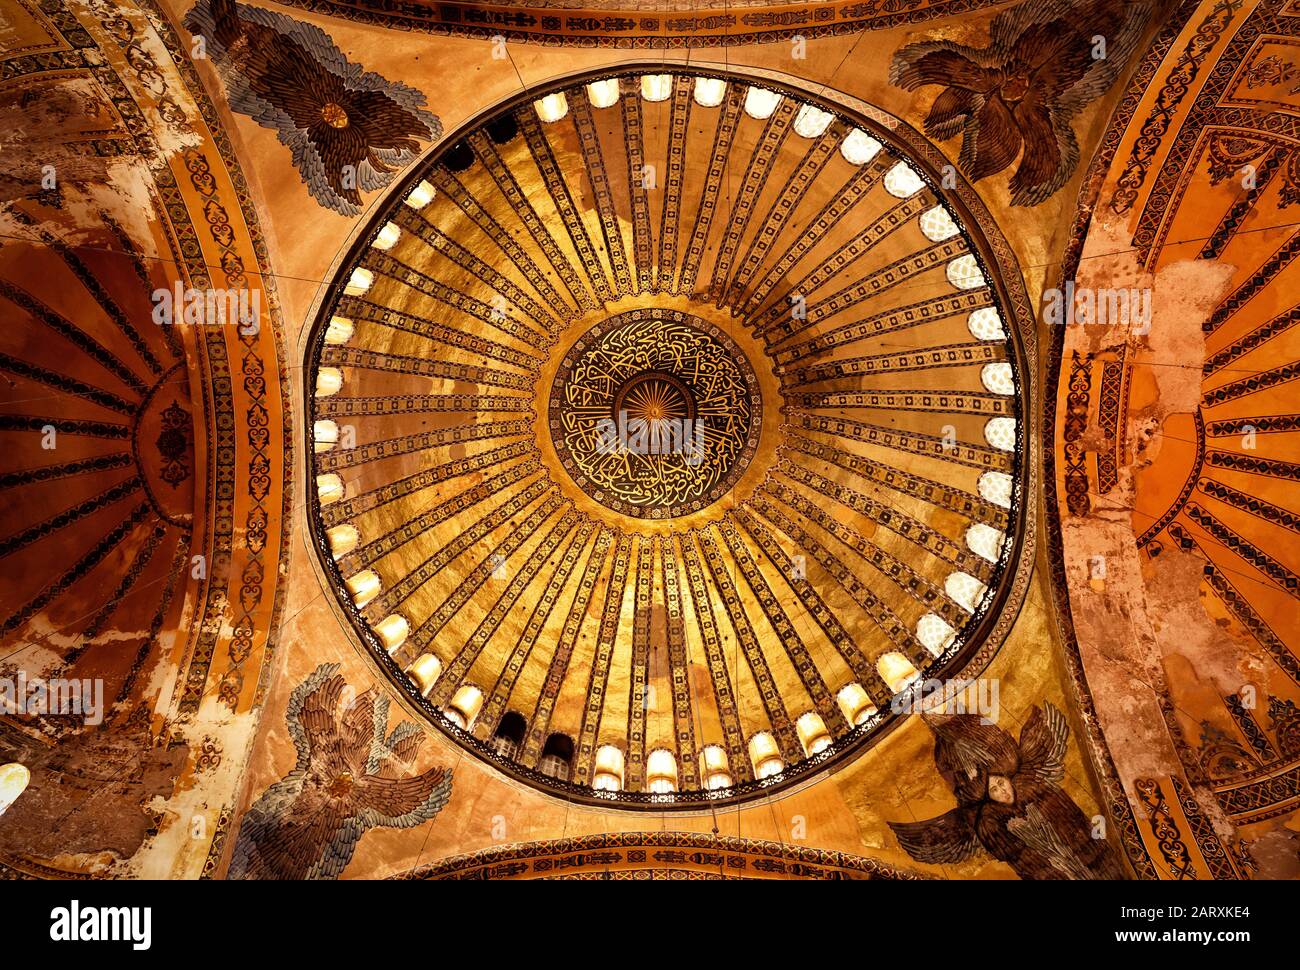 ISTANBUL - MAY 25, 2013: The ceiling of the Hagia Sophia. Church of Hagia Sophia is the greatest monument of Byzantine Culture. It was built in the 6t Stock Photo